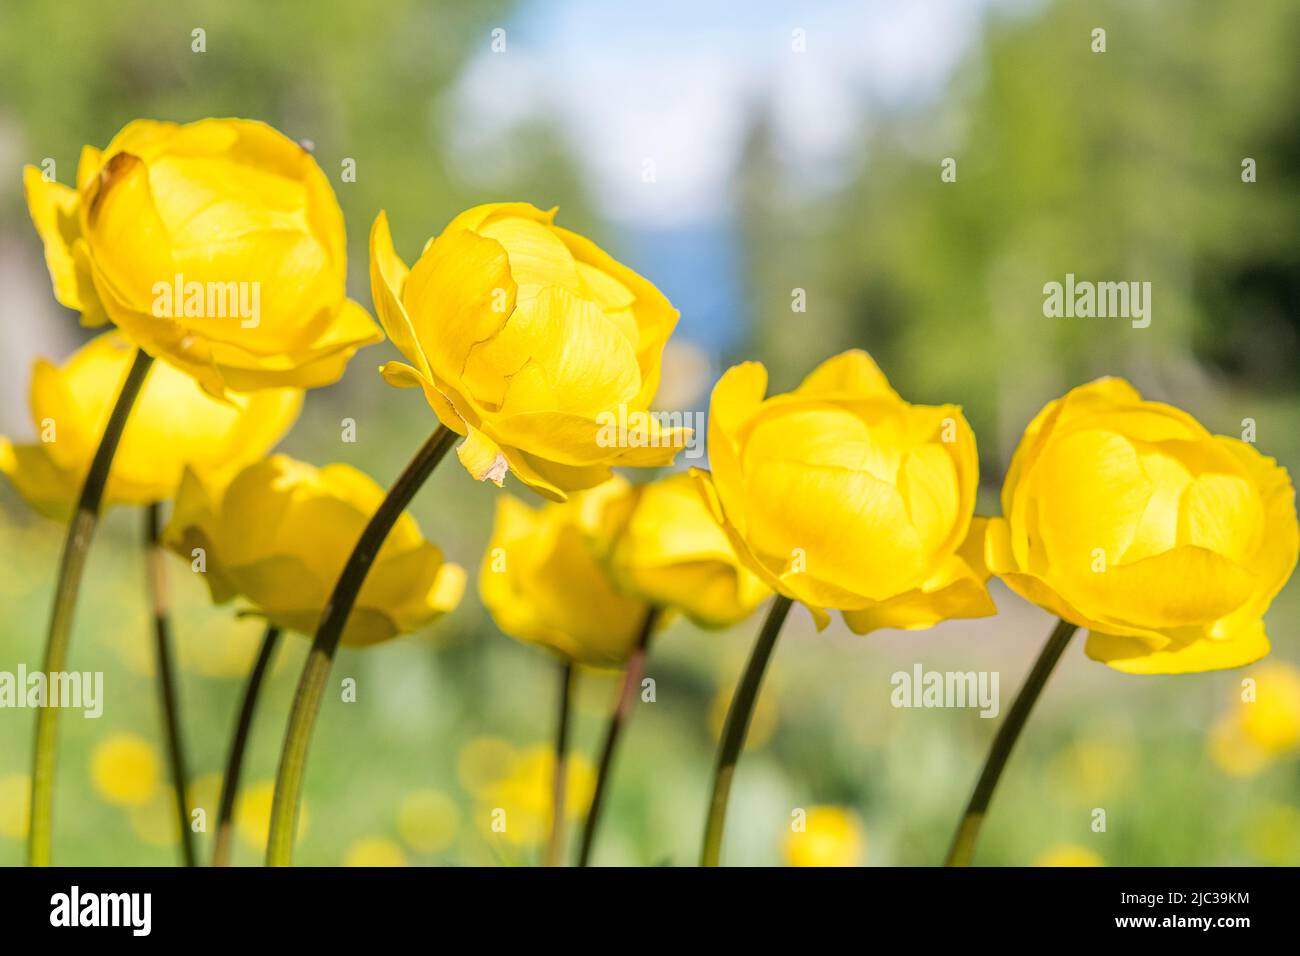 Trollius europaeus, the globeflower is a perennial flowering plant of the family Ranunculaceae. Stock Photo